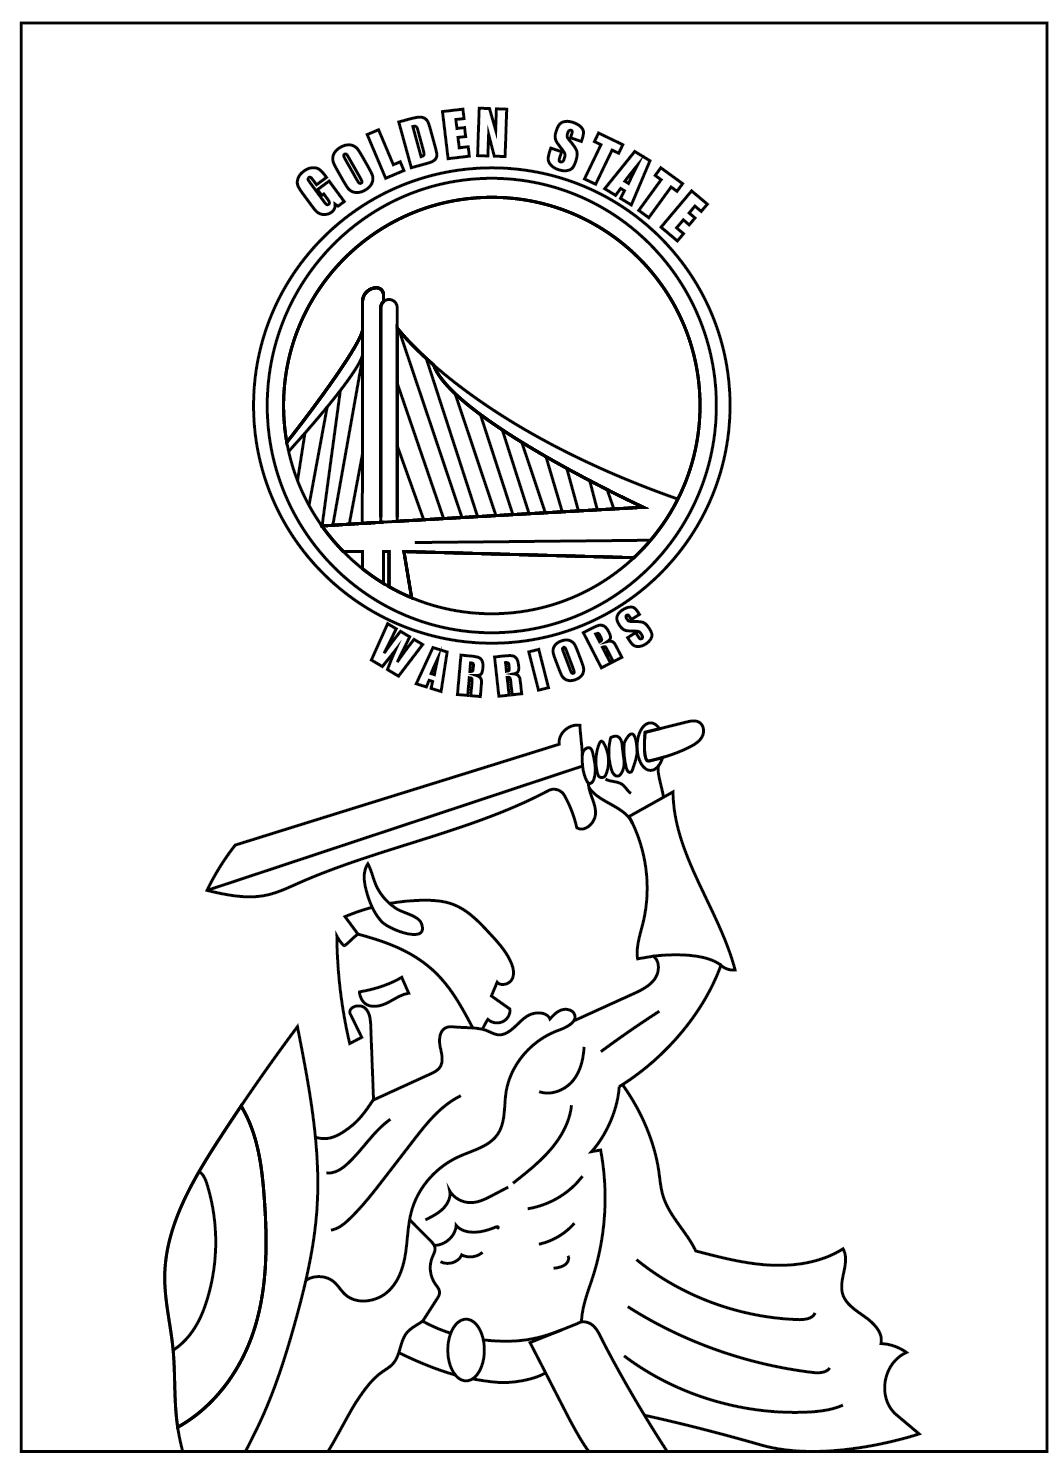 free printable golden state warrior coloring pages